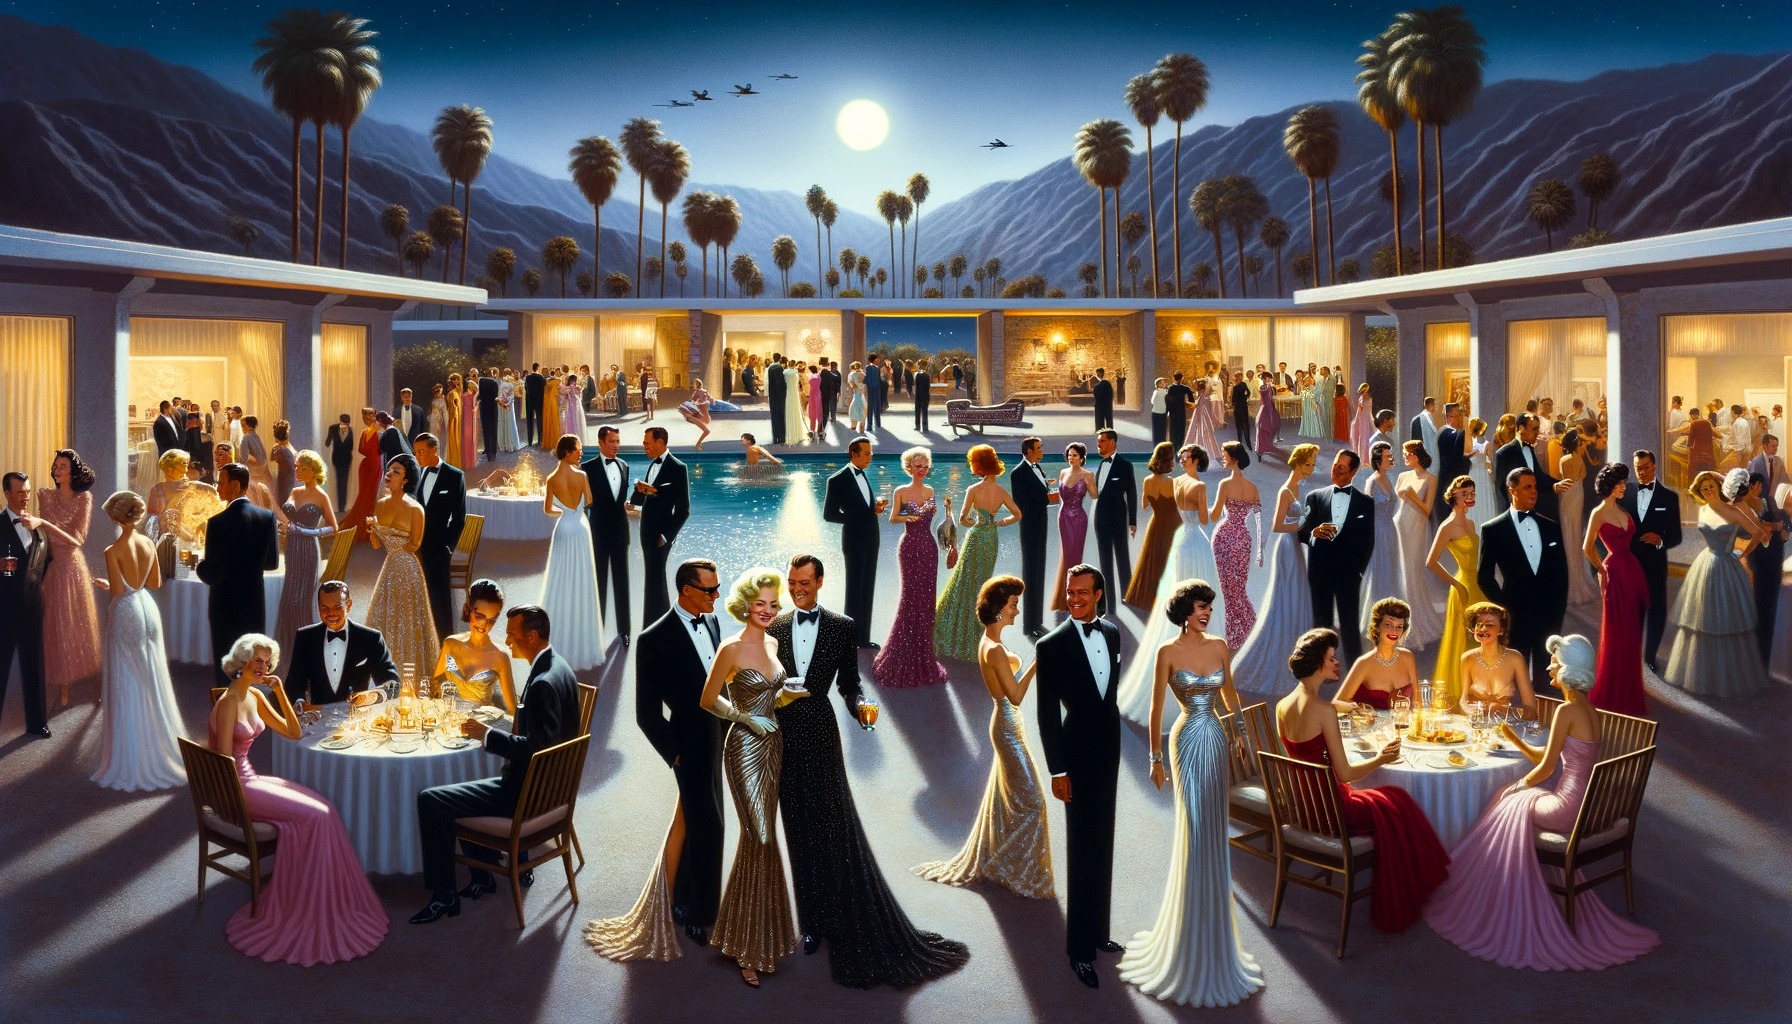 essence of Palm Springs' Golden Era evening wear and formal attire